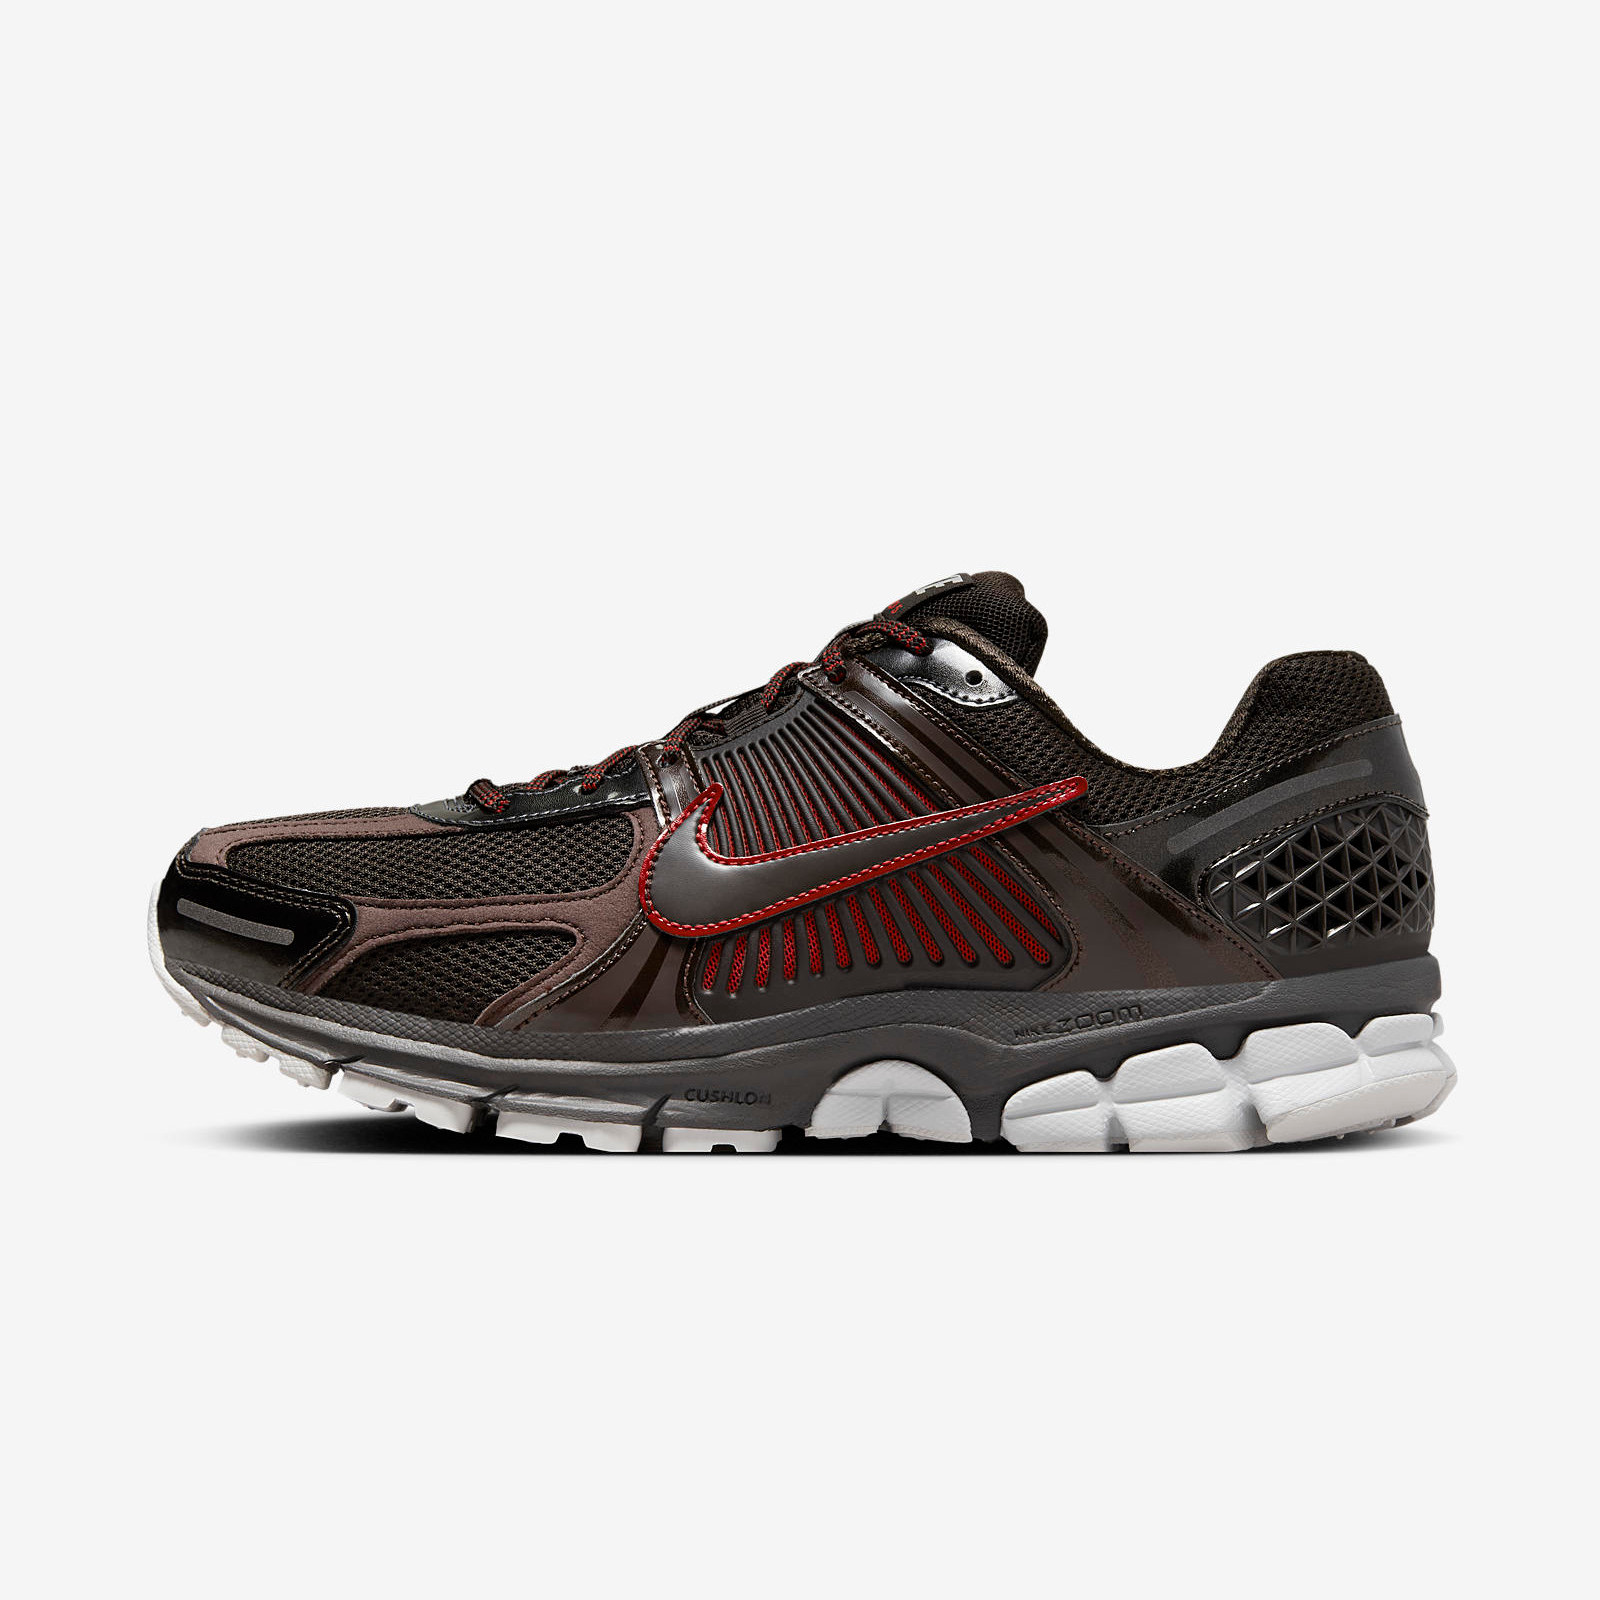 Nike Zoom Vomero 5
Brown / Red